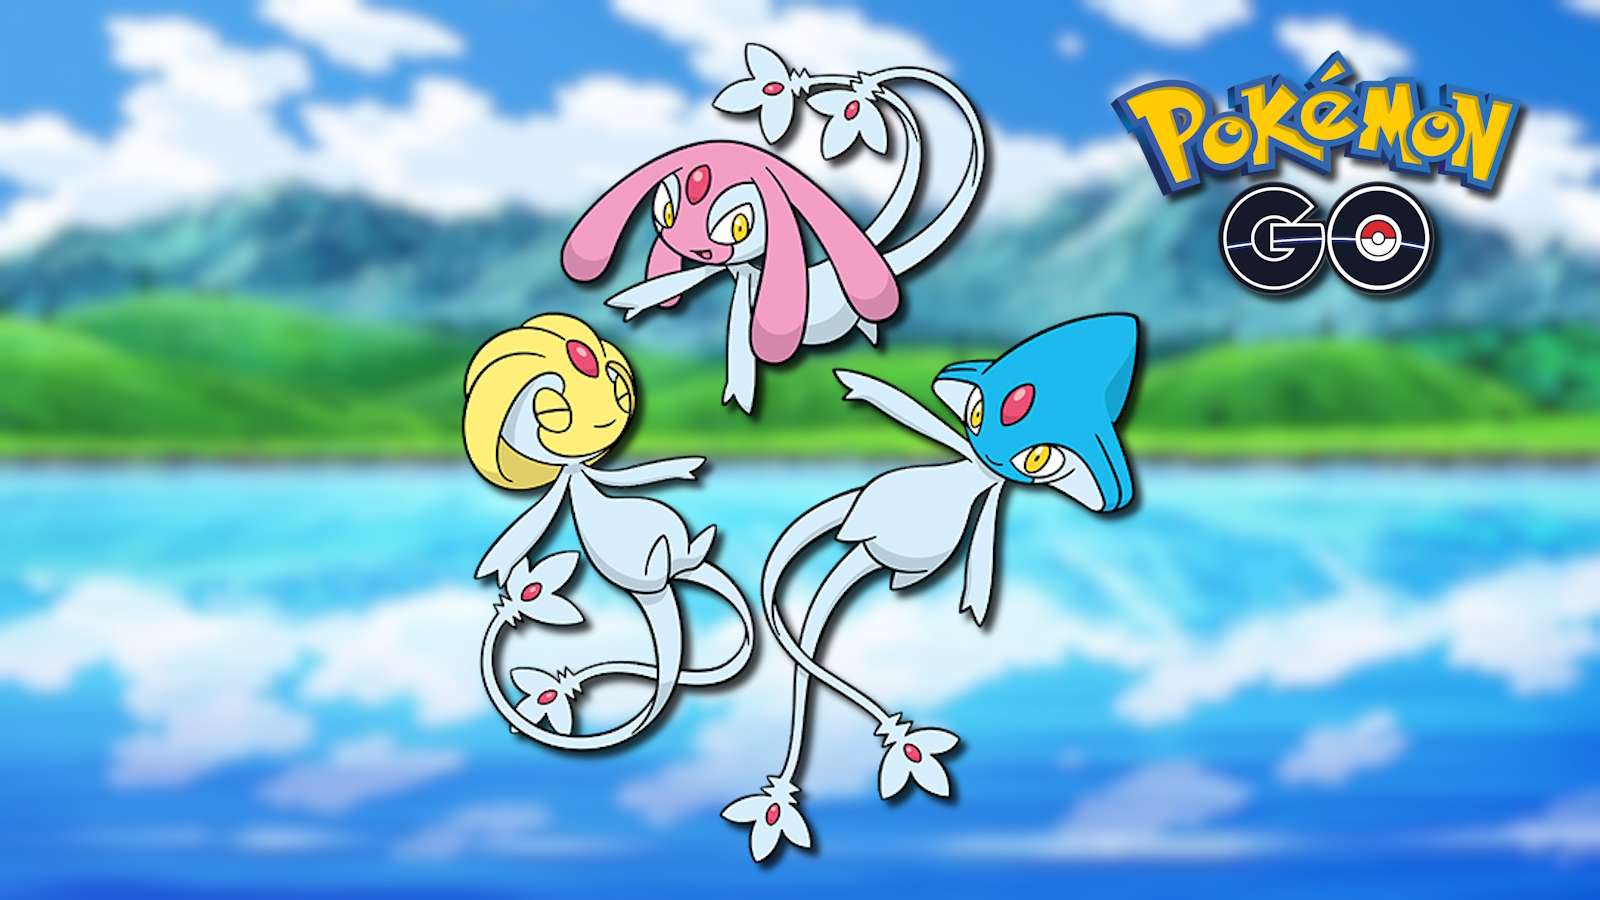 Azelf, Mesprit, and Uxie, the Lake Guardians in Pokemon Go.